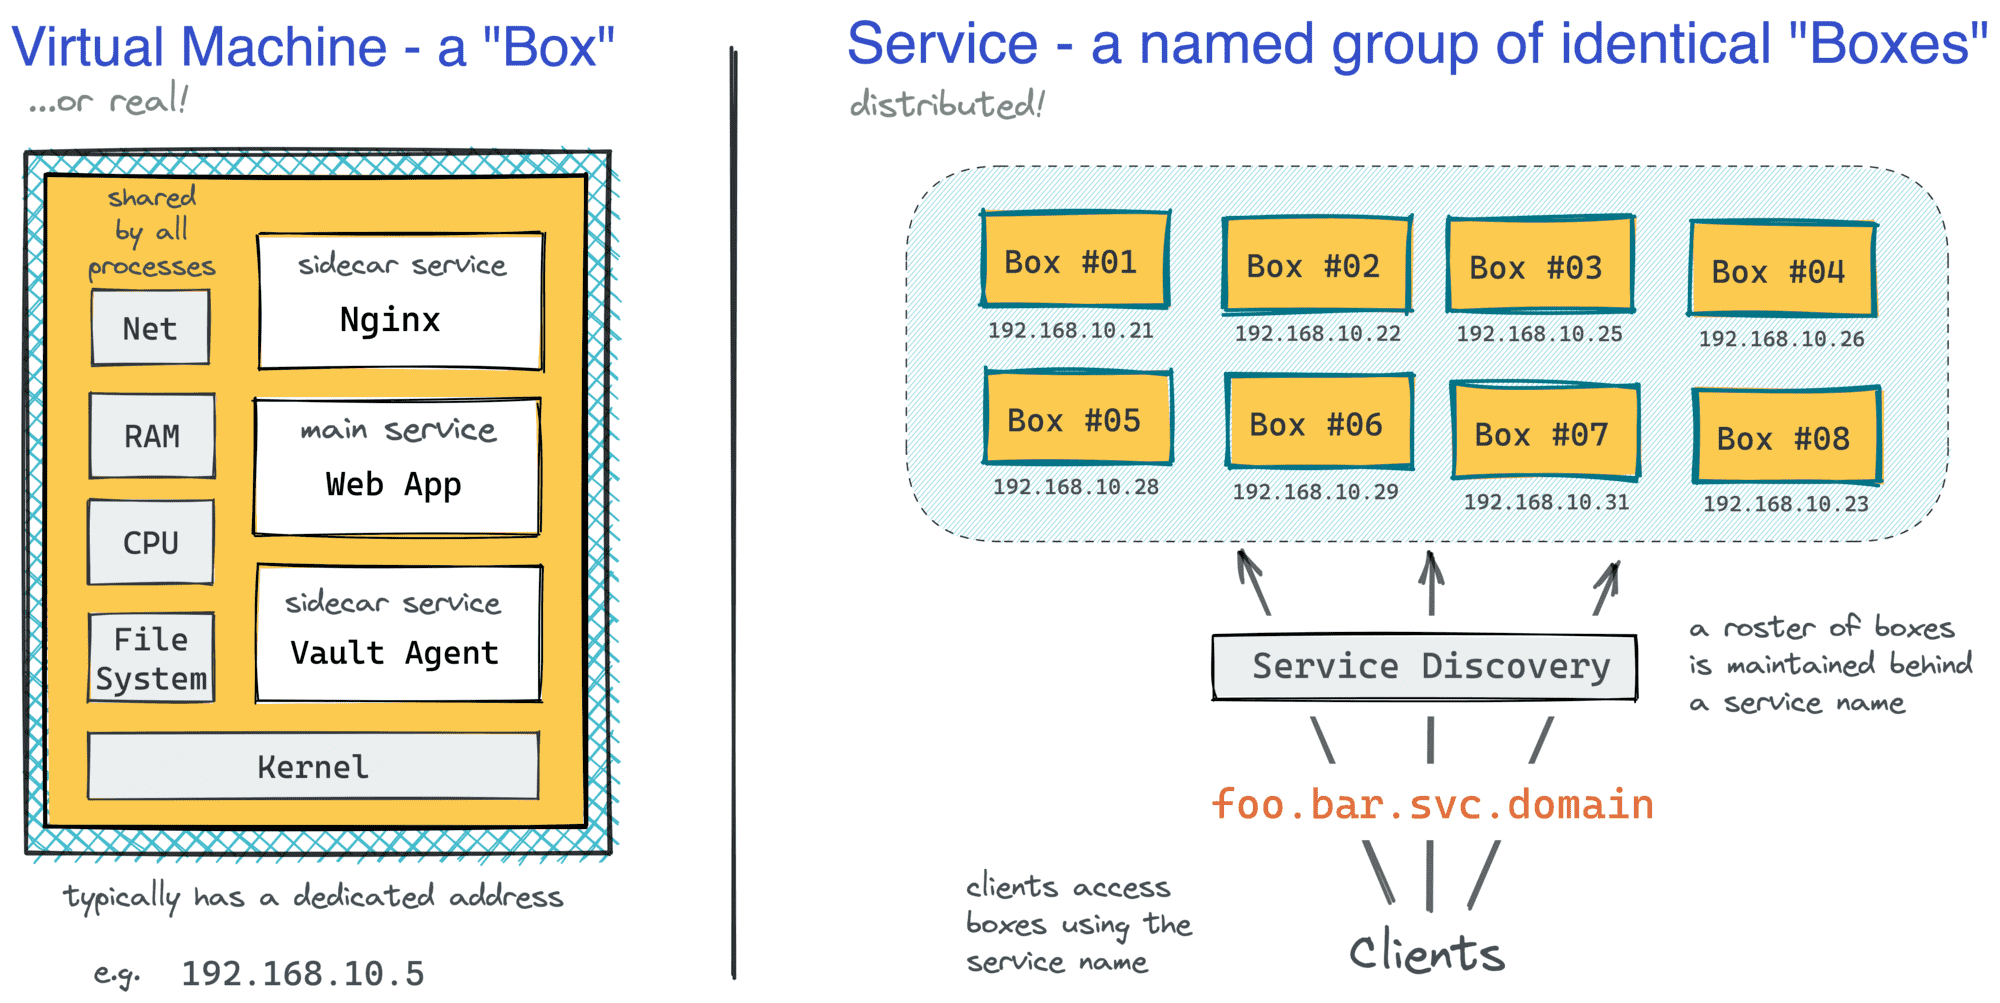 Service - a named group of identical boxes.